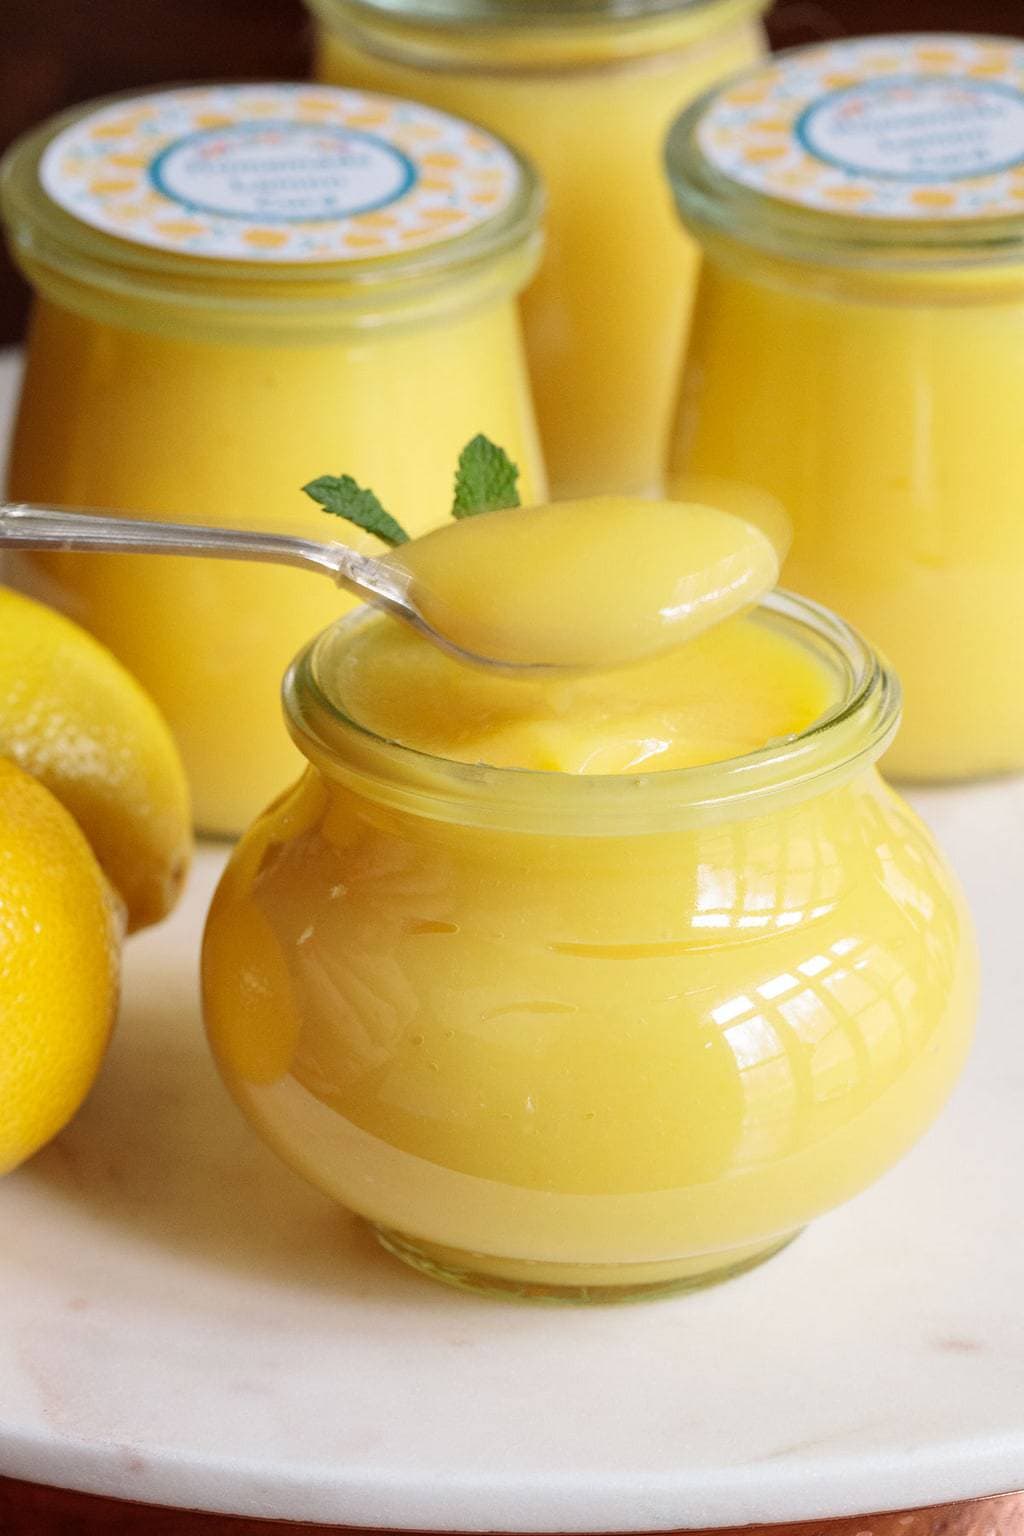 Photo of glass jars filled with Ridiculously Easy Microwave Lemon Curd and a spoonful of lemon curd over the center jar.